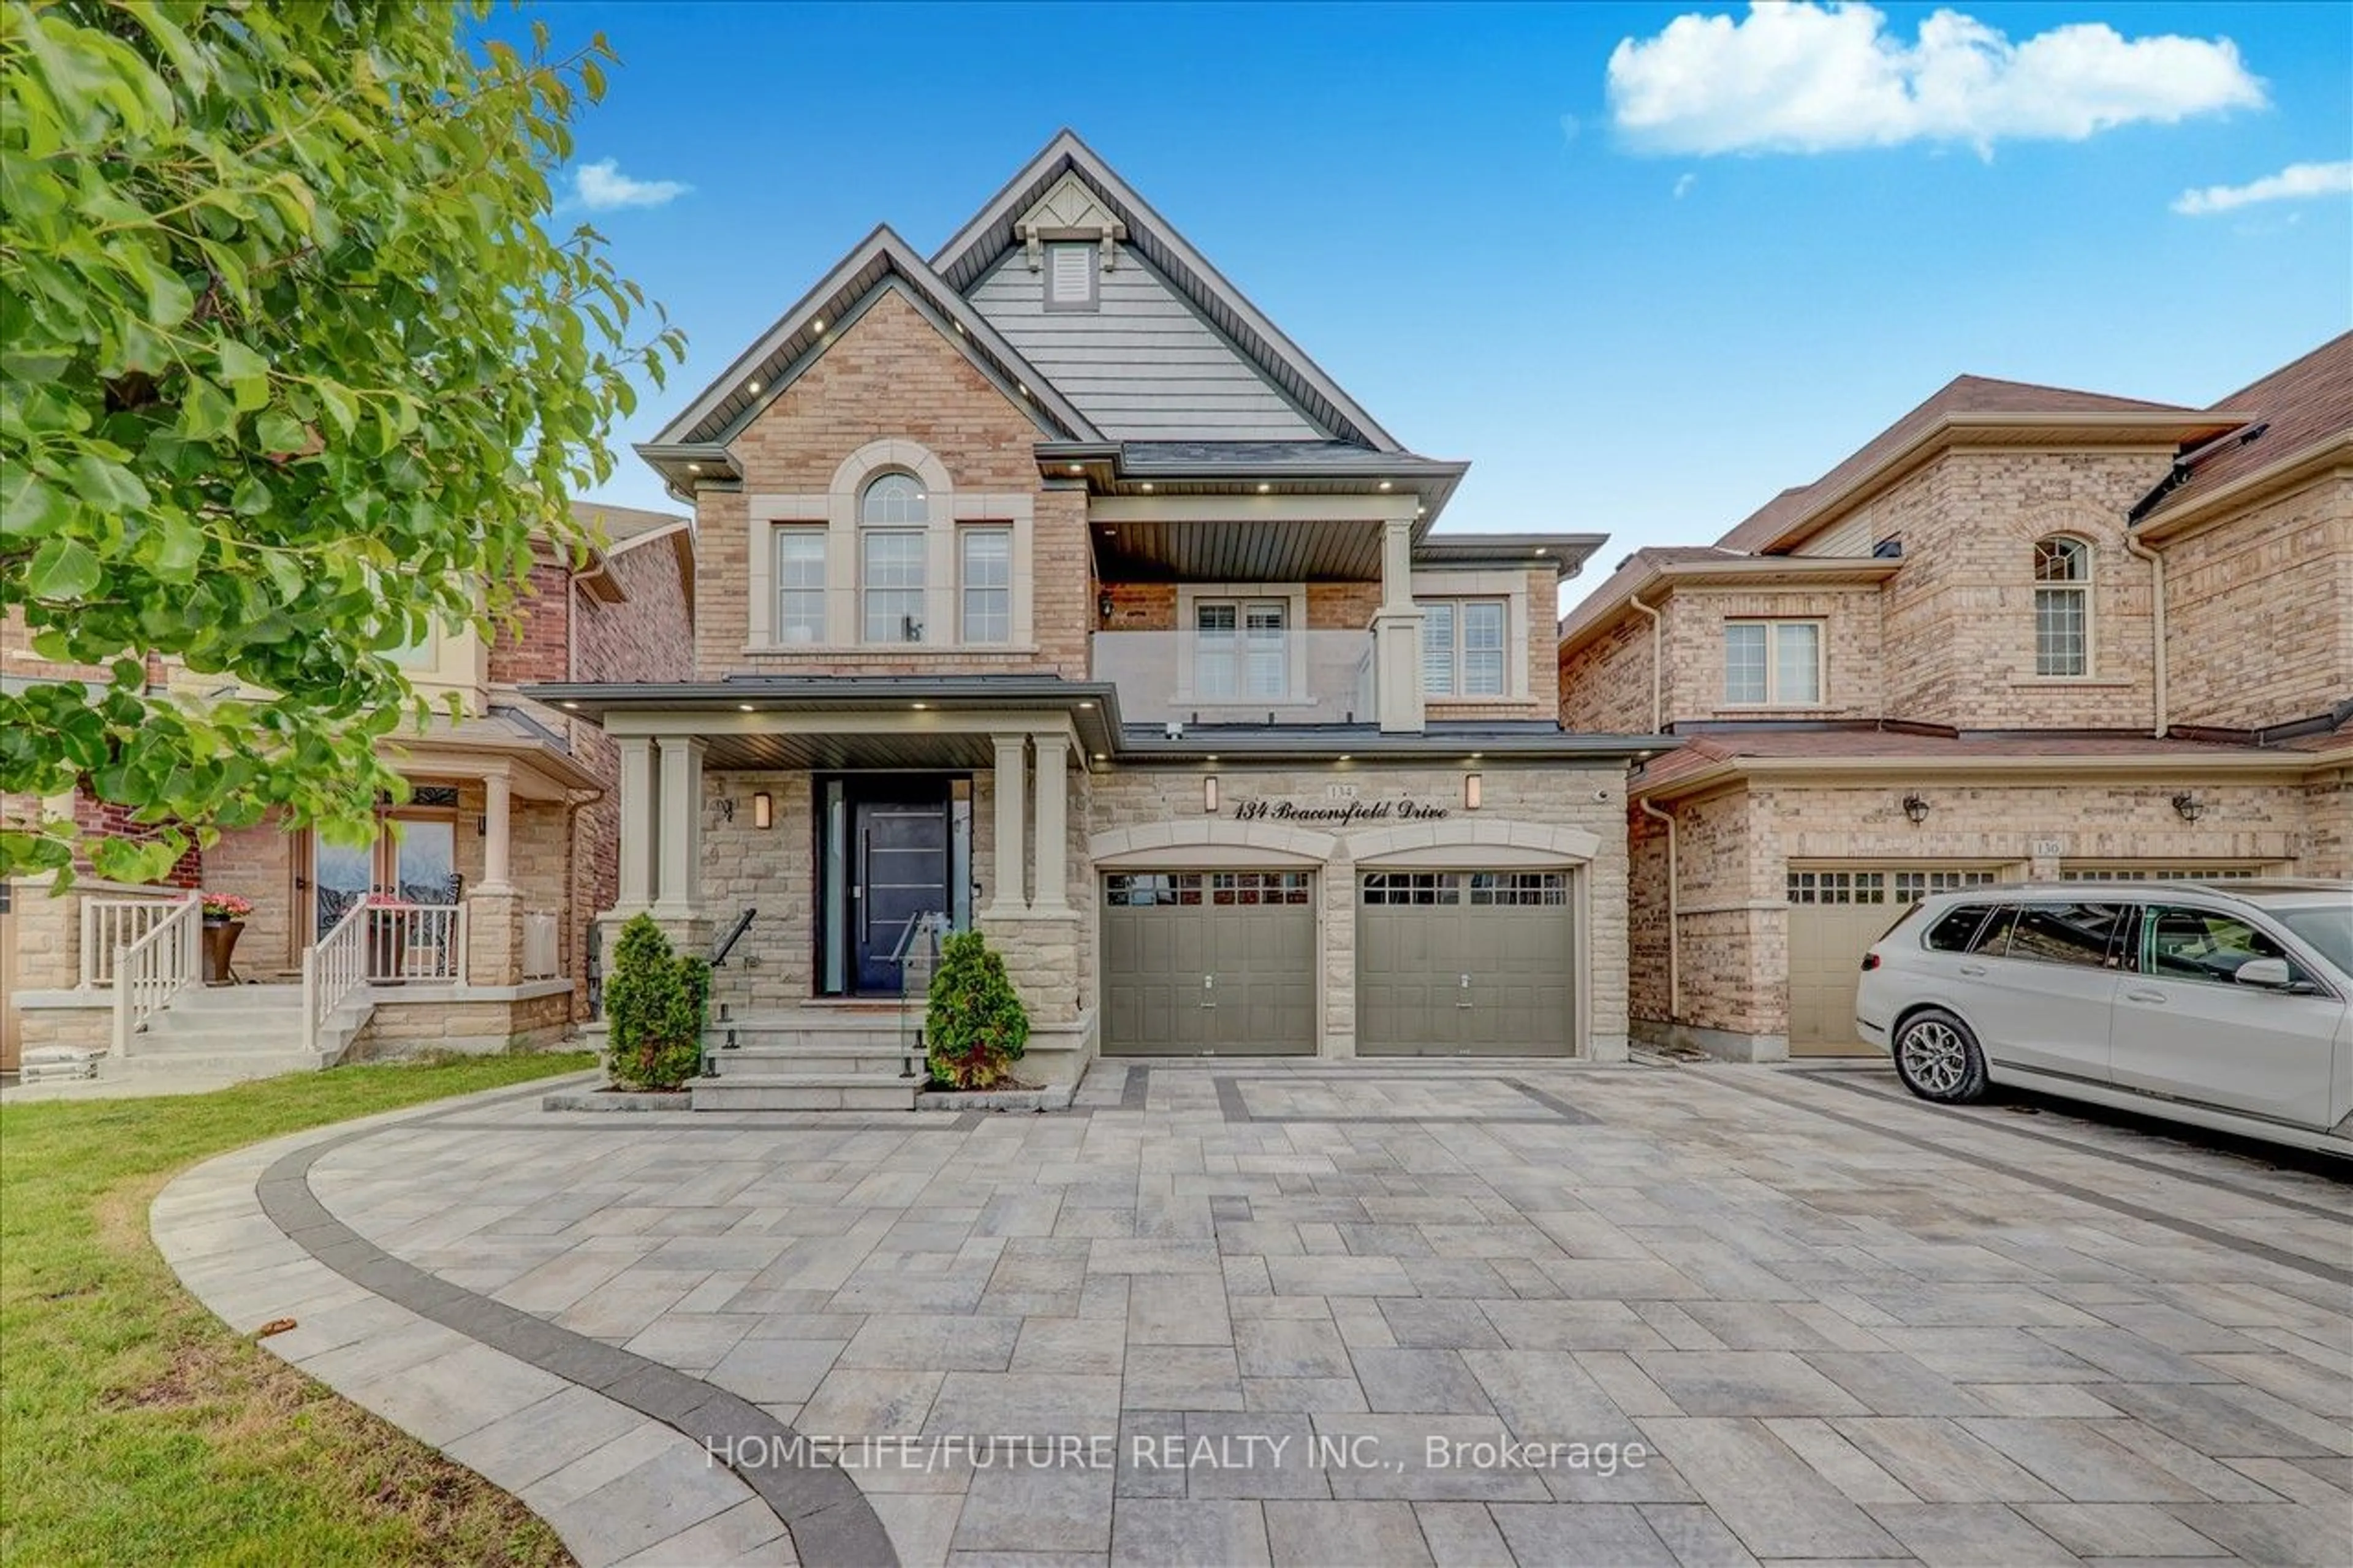 Home with brick exterior material for 134 Beaconsfiled Dr, Vaughan Ontario L4H 4L6